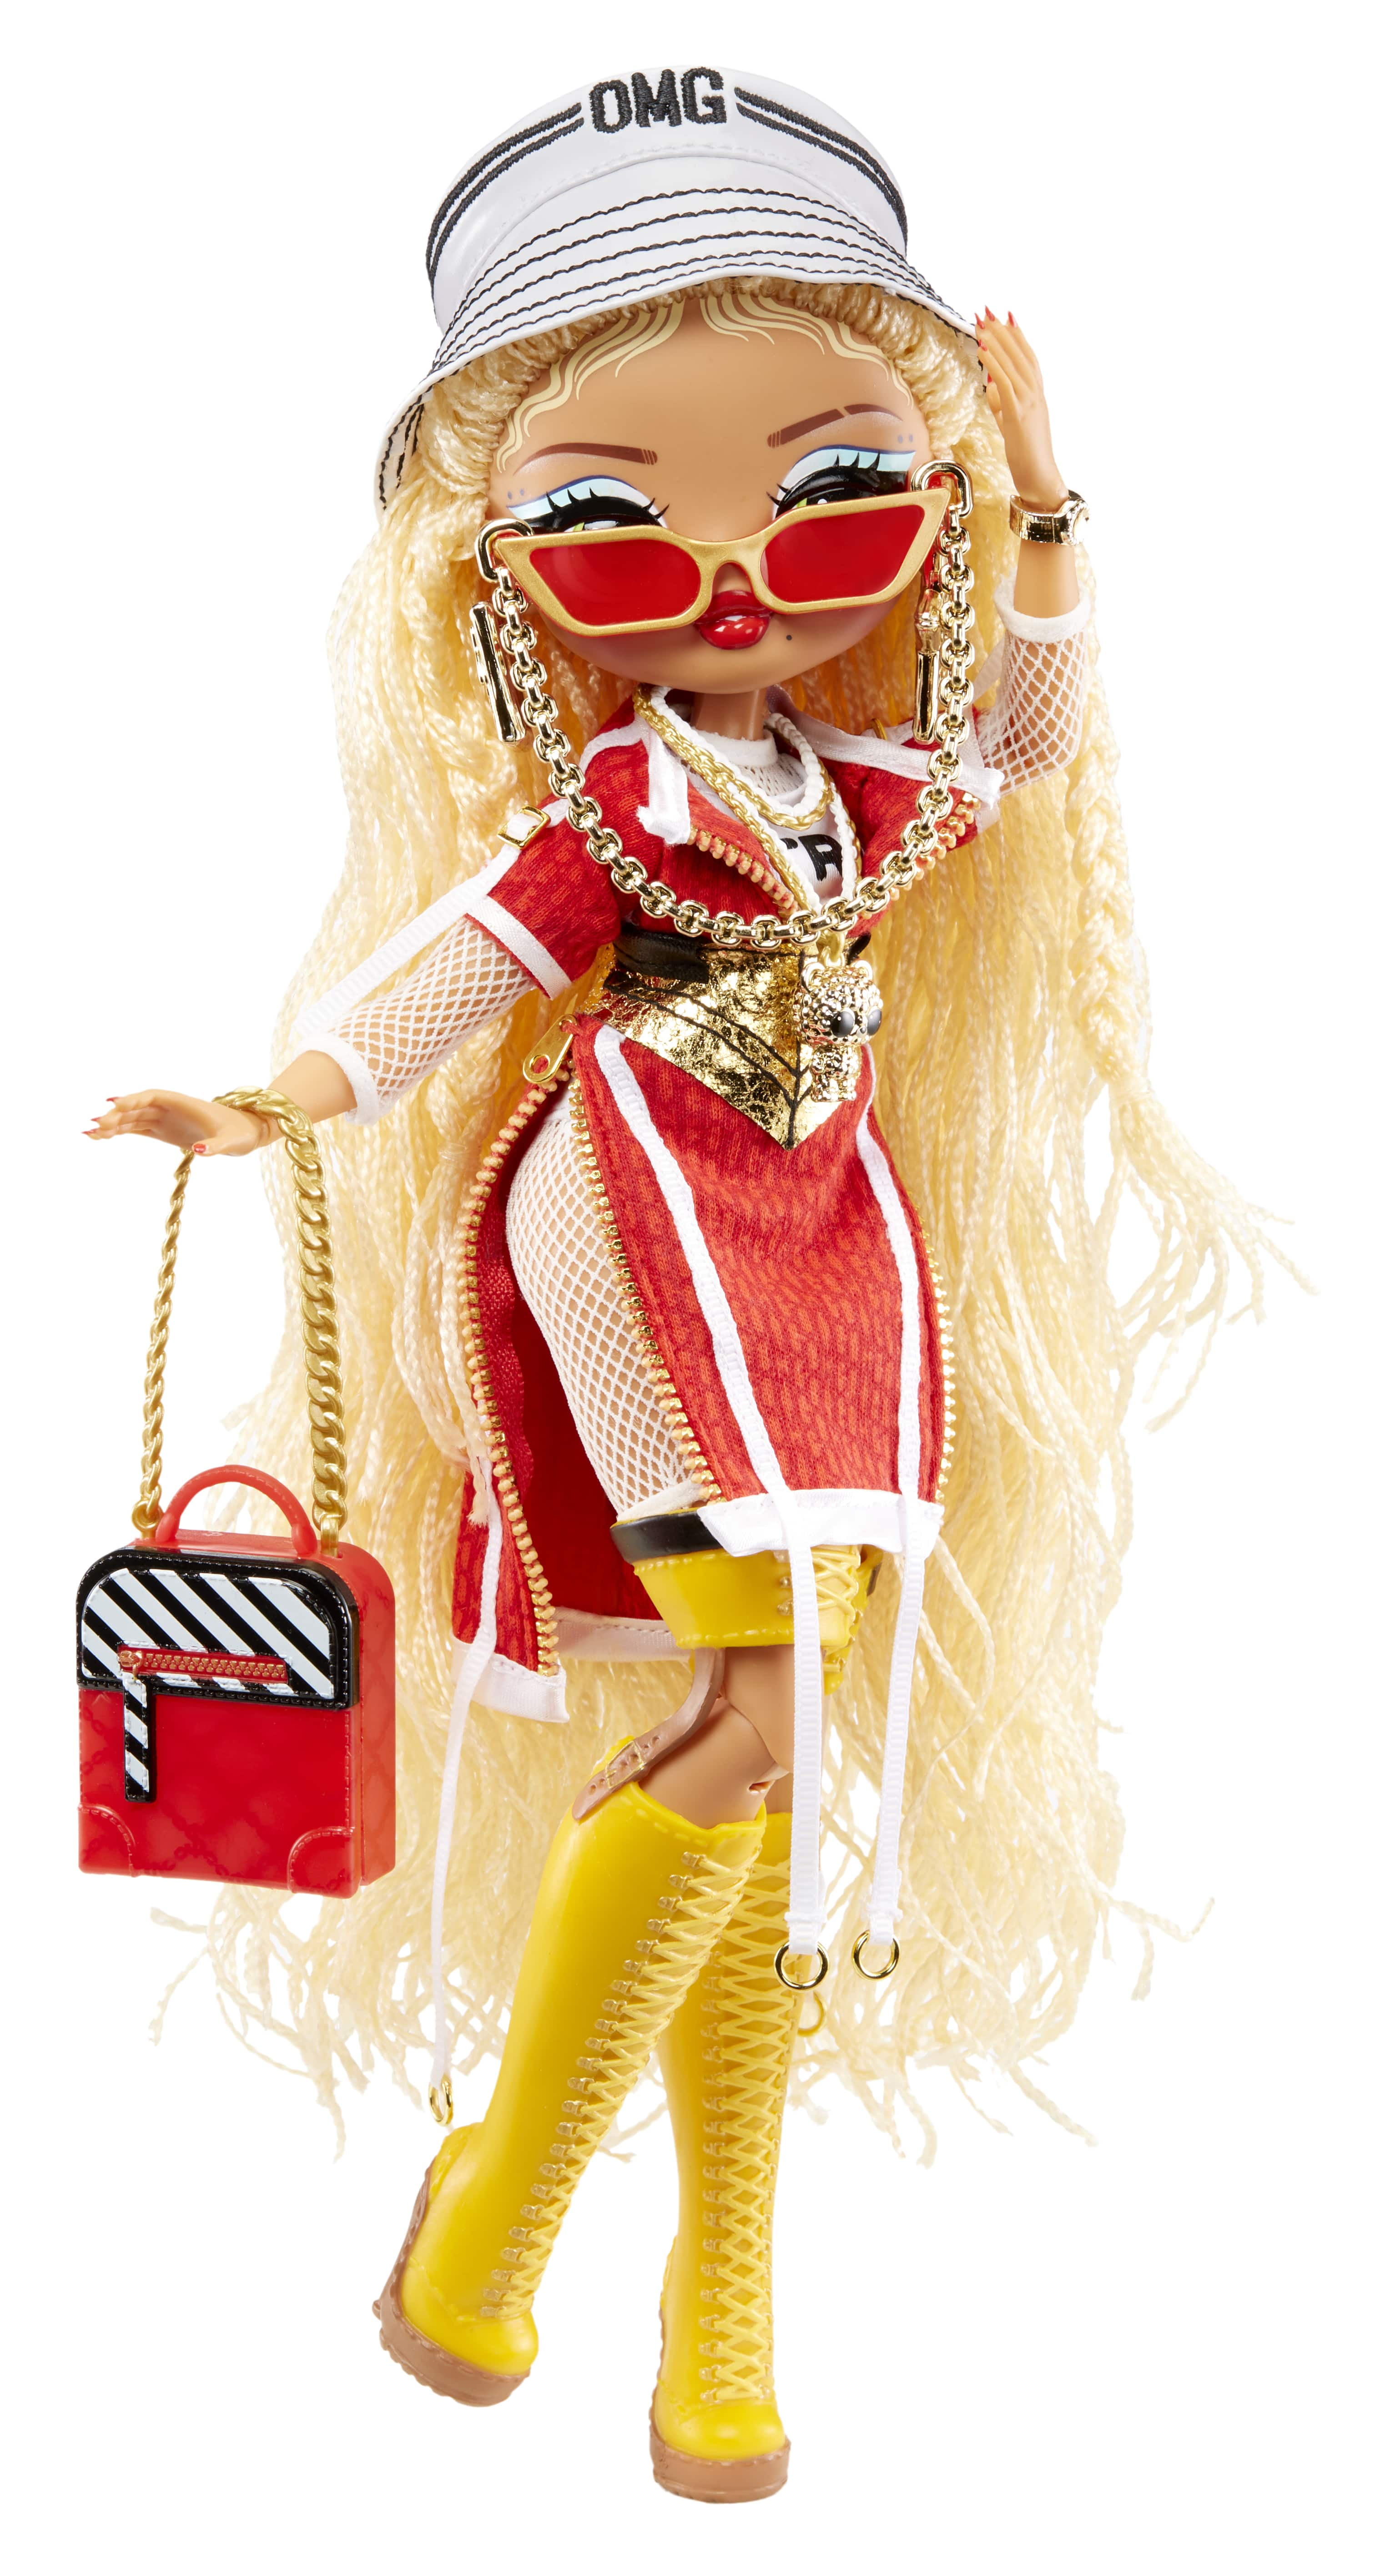 LOL Surprise OMG Fierce Swag Fashion Doll with Surprises Including Outfits and Accessories for Fashion Toy, Girls Ages 3 and Up, 11.5-inch Doll, Collector